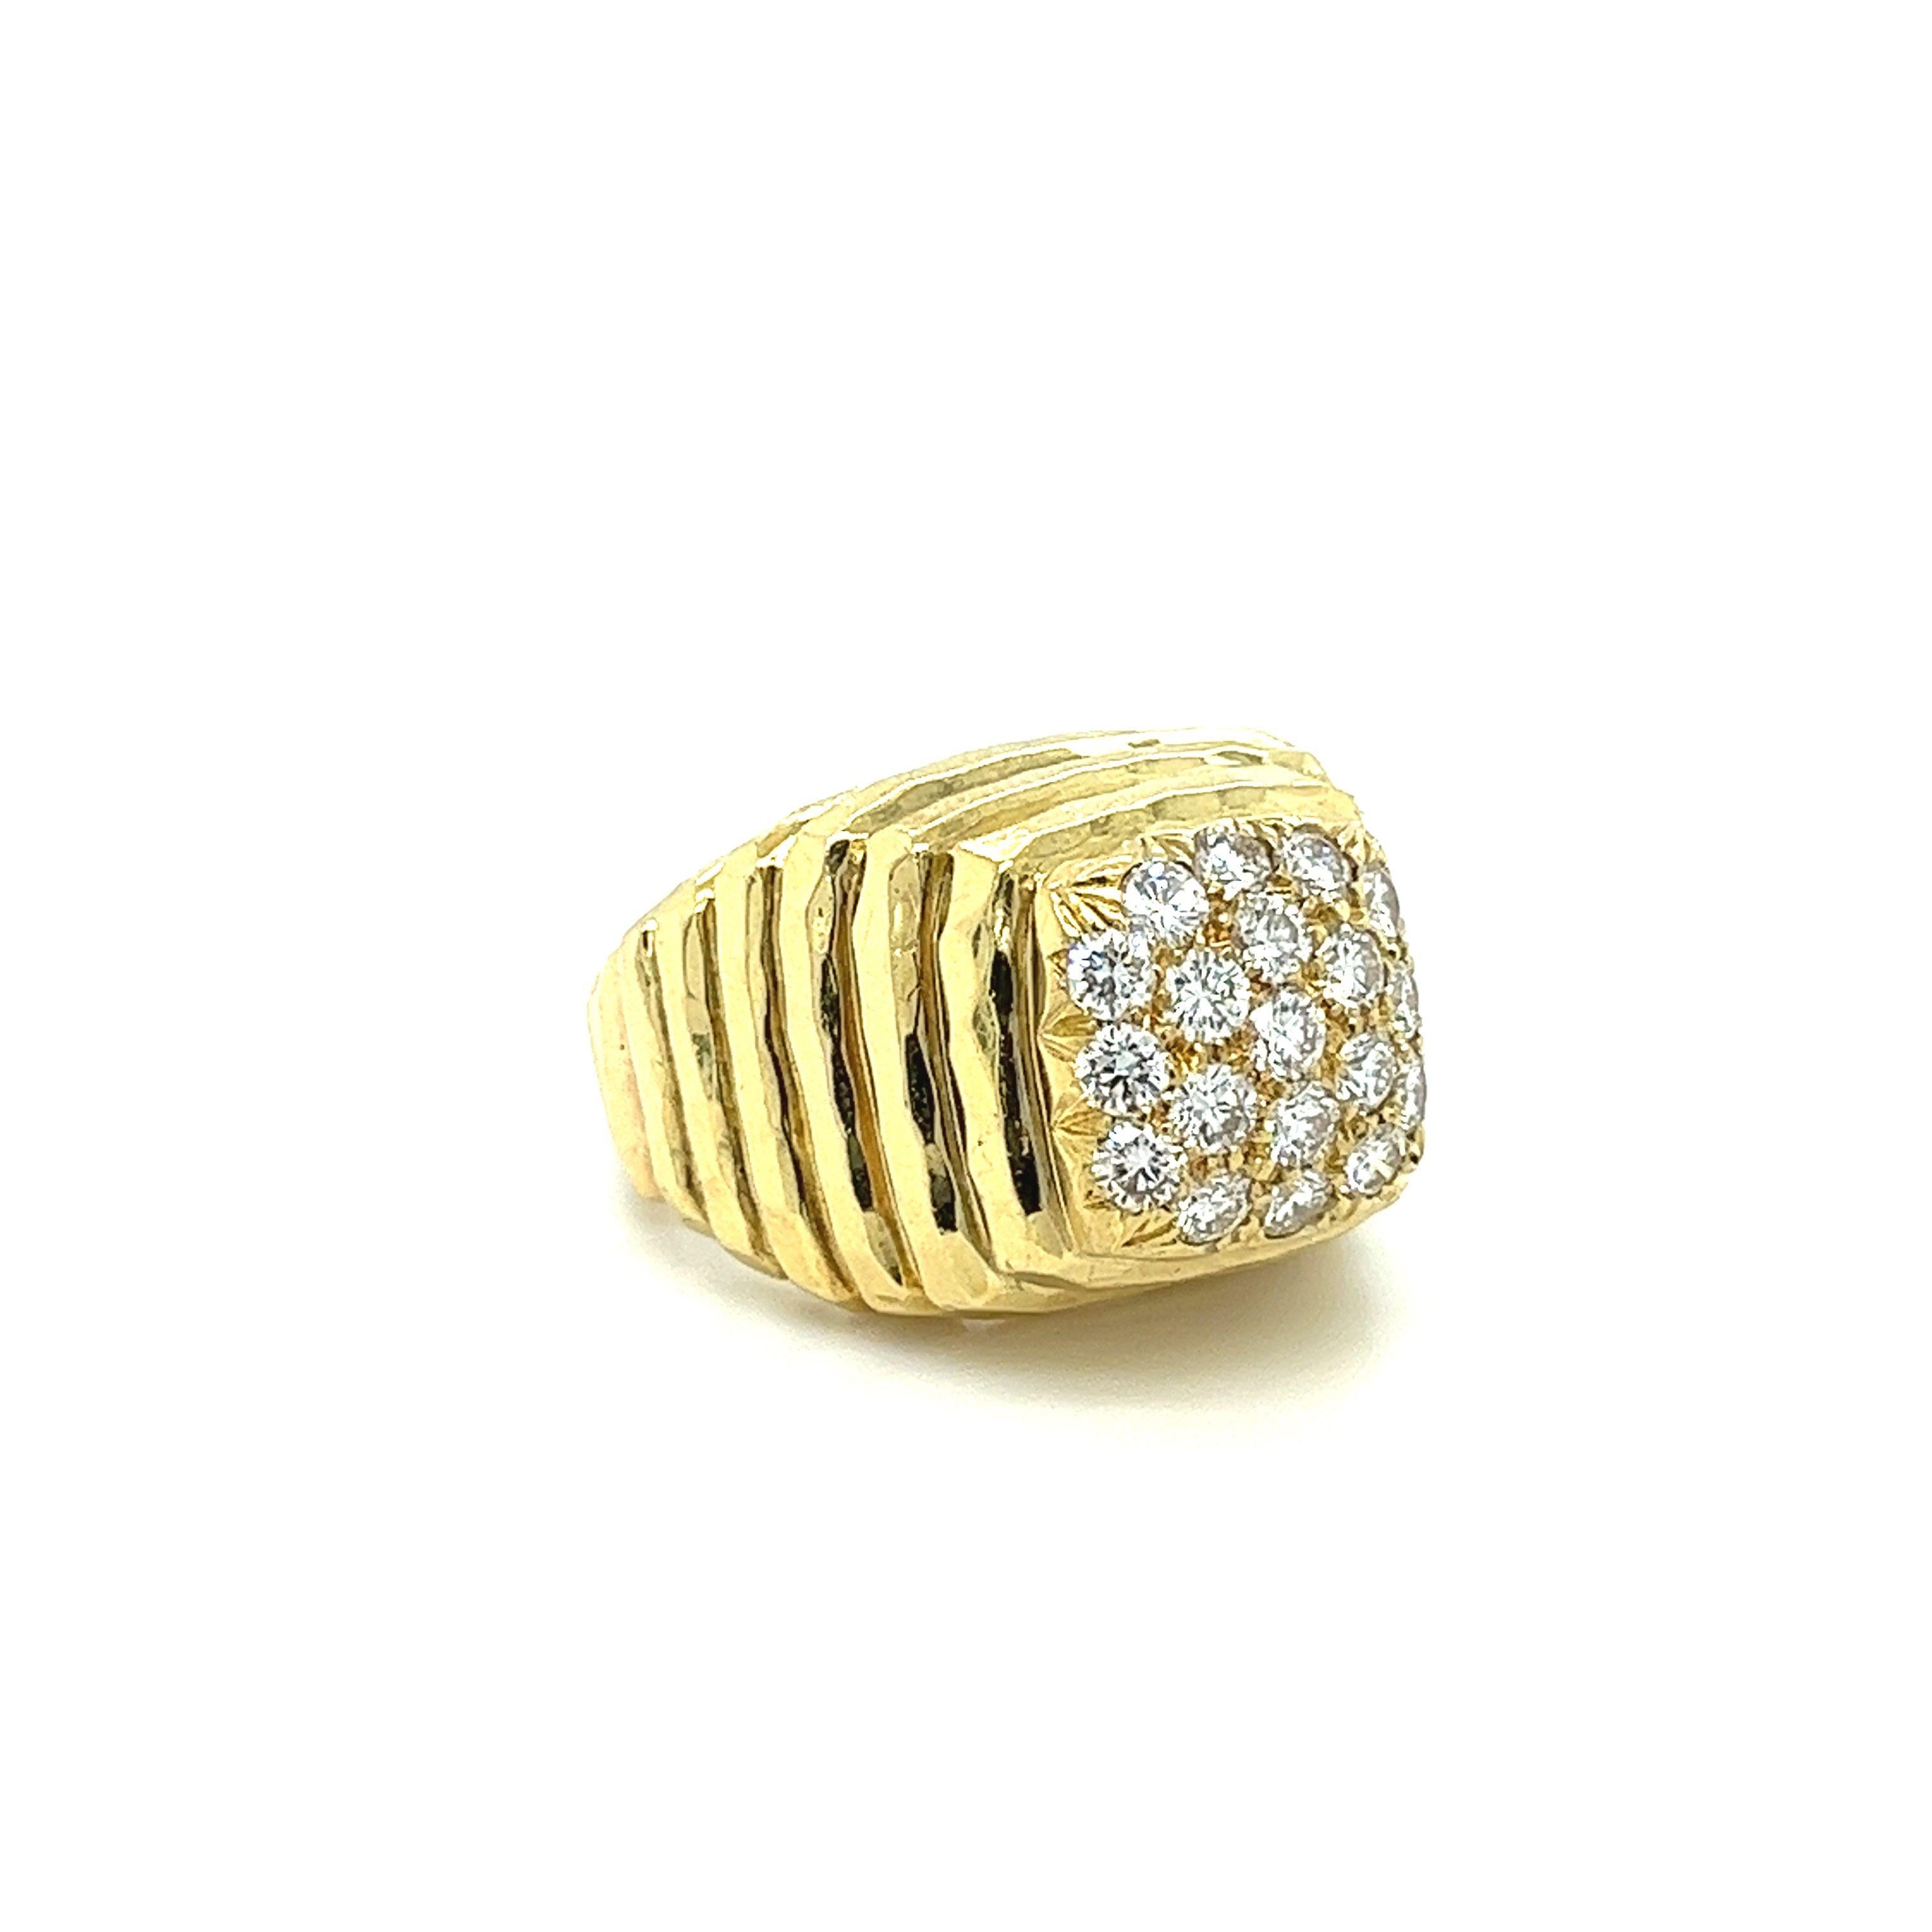 Henry Dunay signed elevated 19 piece diamond cluster ring, set in 18-karat textured ribbed solid yellow gold. 

Details: 
✔ Metal: 18K Yellow Gold
✔ Size: 8 
✔ Weight: 17.3 Grams

Stone Details:
✔ Stone Count: 19 Pieces 
✔ Carat: 1.20 (total)
✔ Cut: